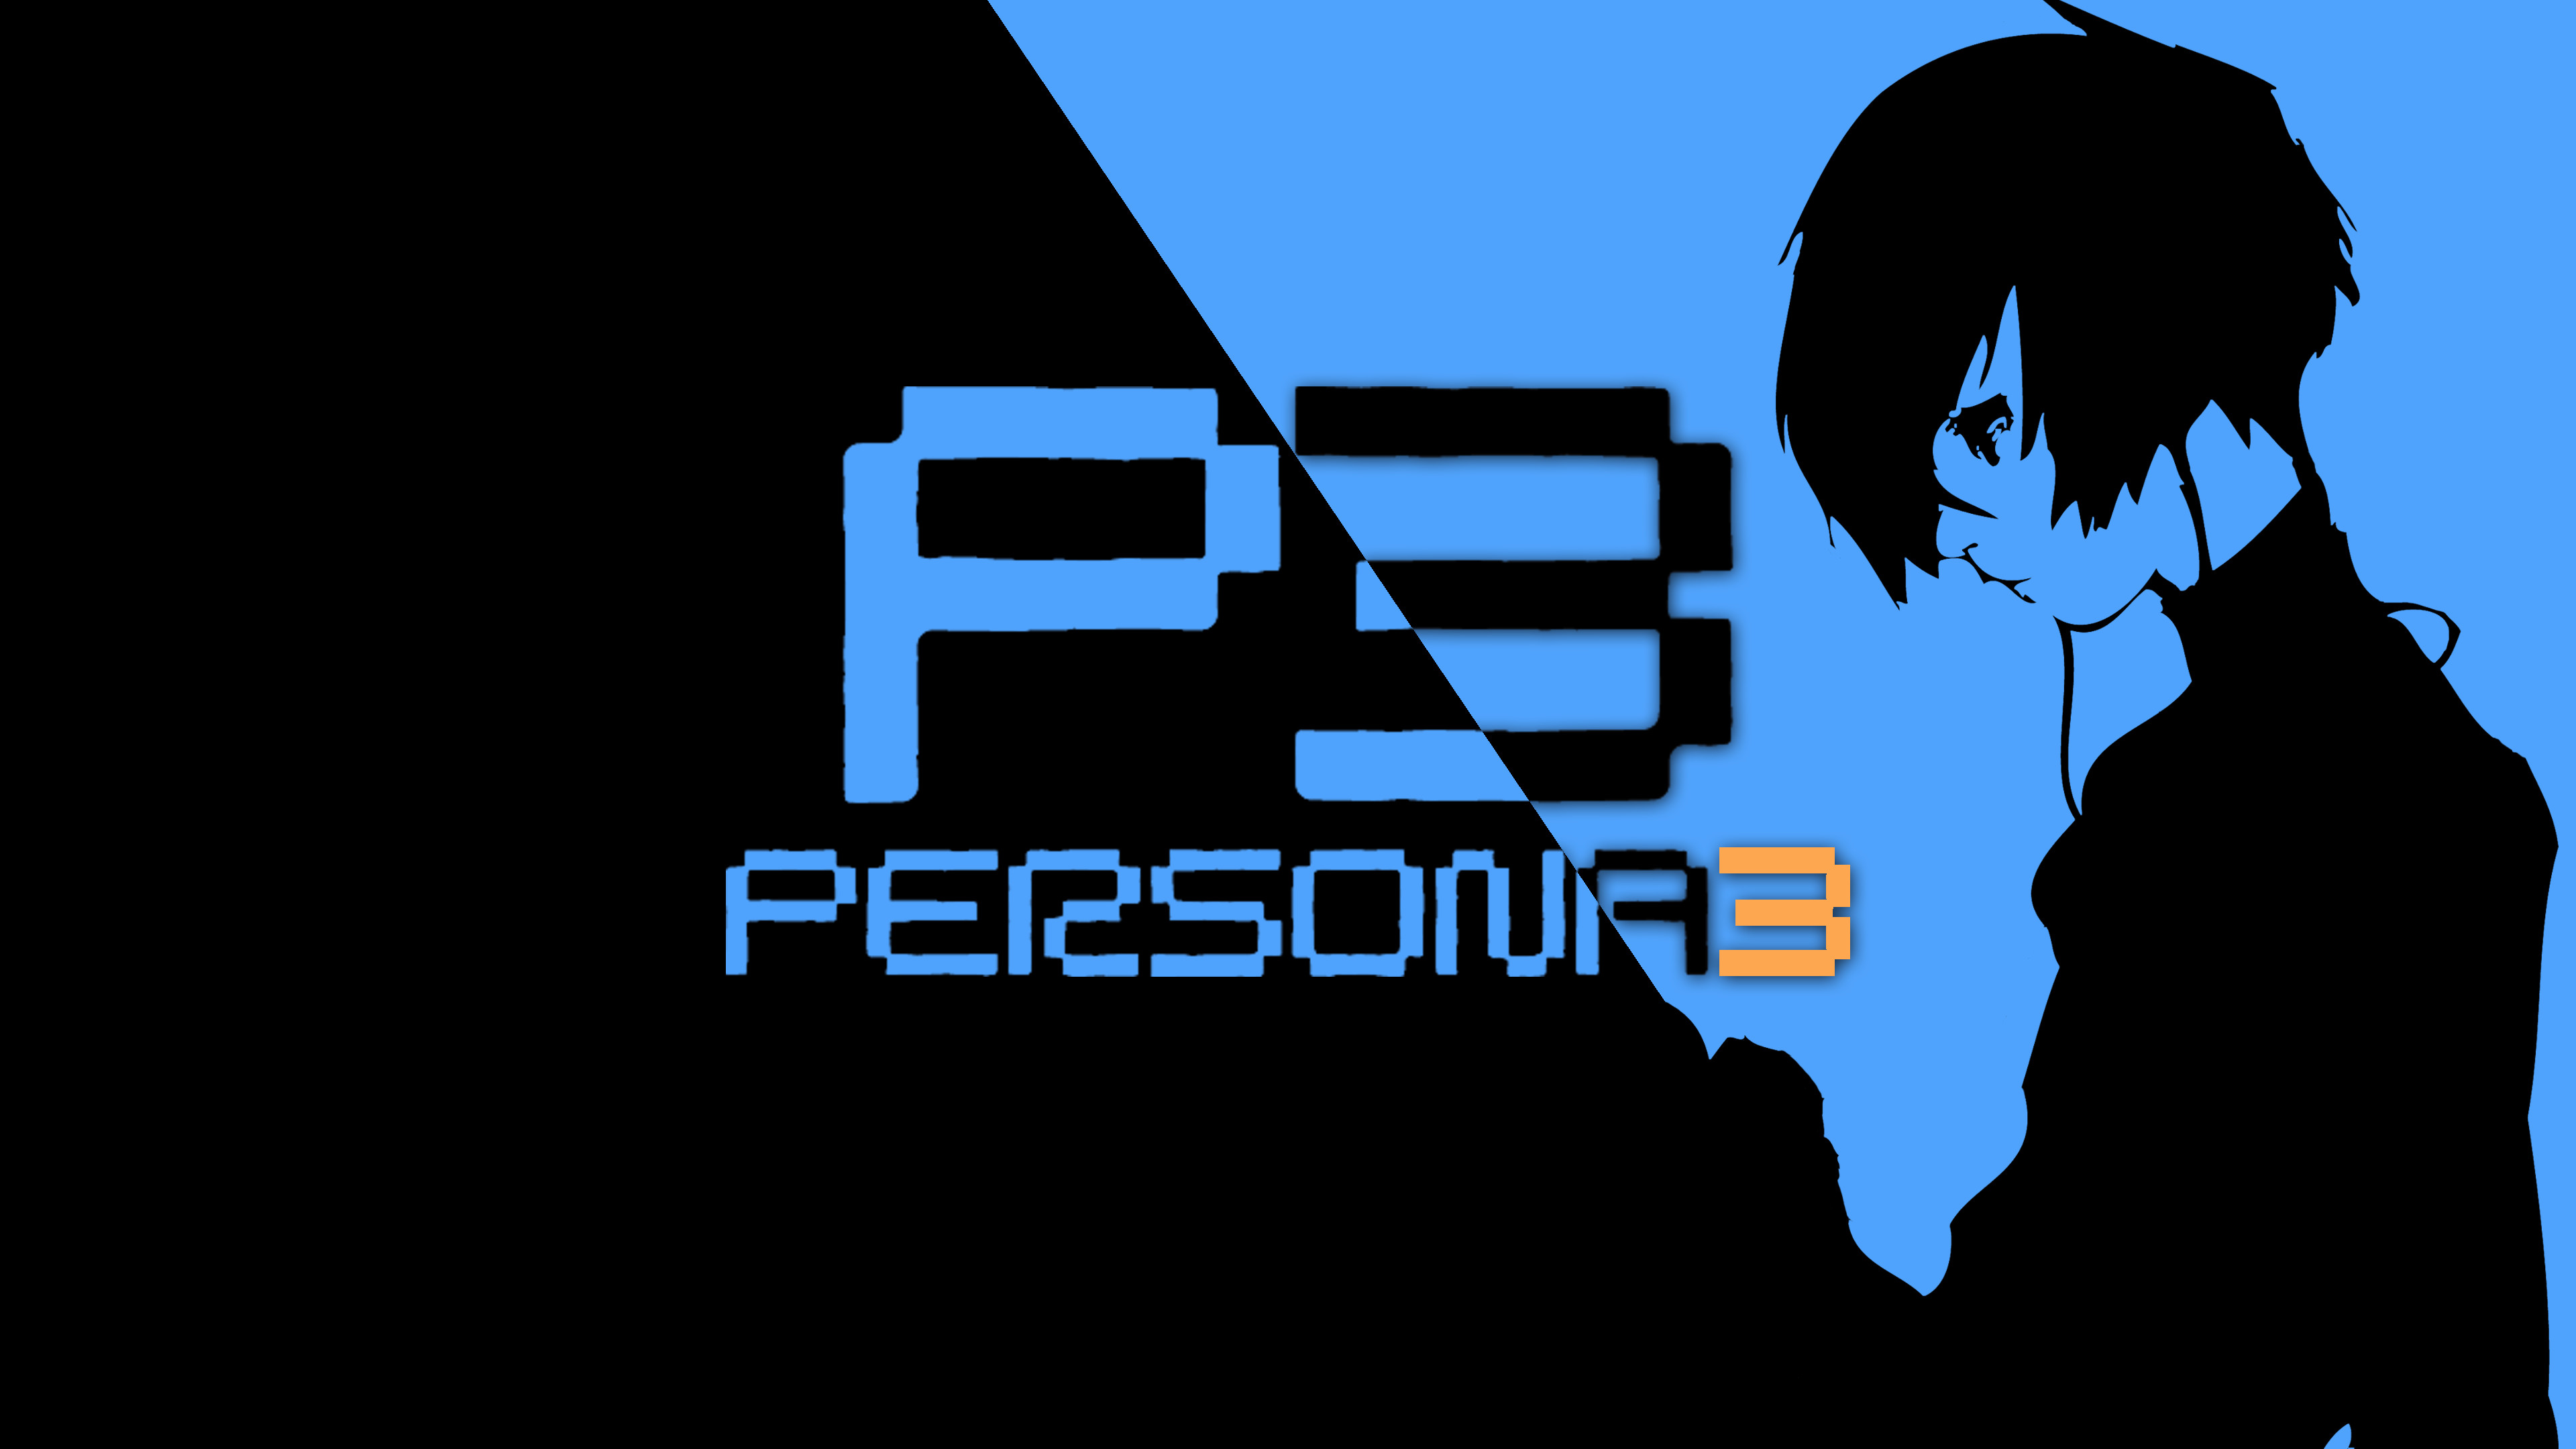 3840x2160 You should check out my older P3 wallpaper, which is arguably way better  than this one.